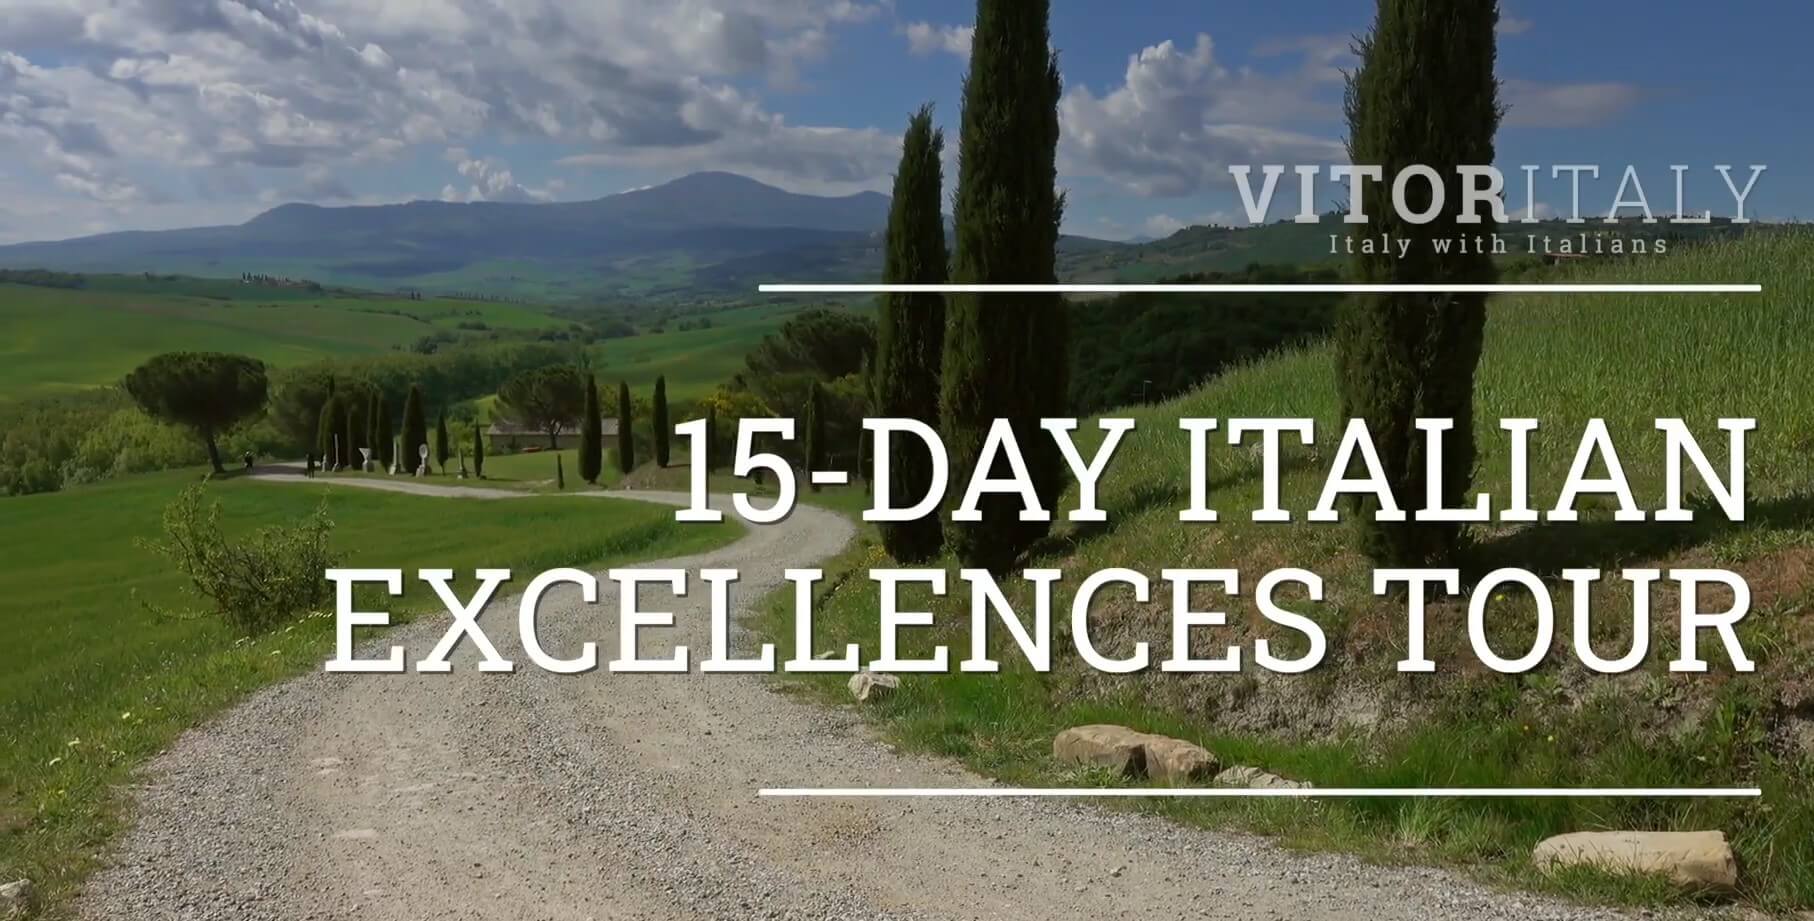 15-DAY ITALIAN EXCELLENCES PRIVATE TOUR